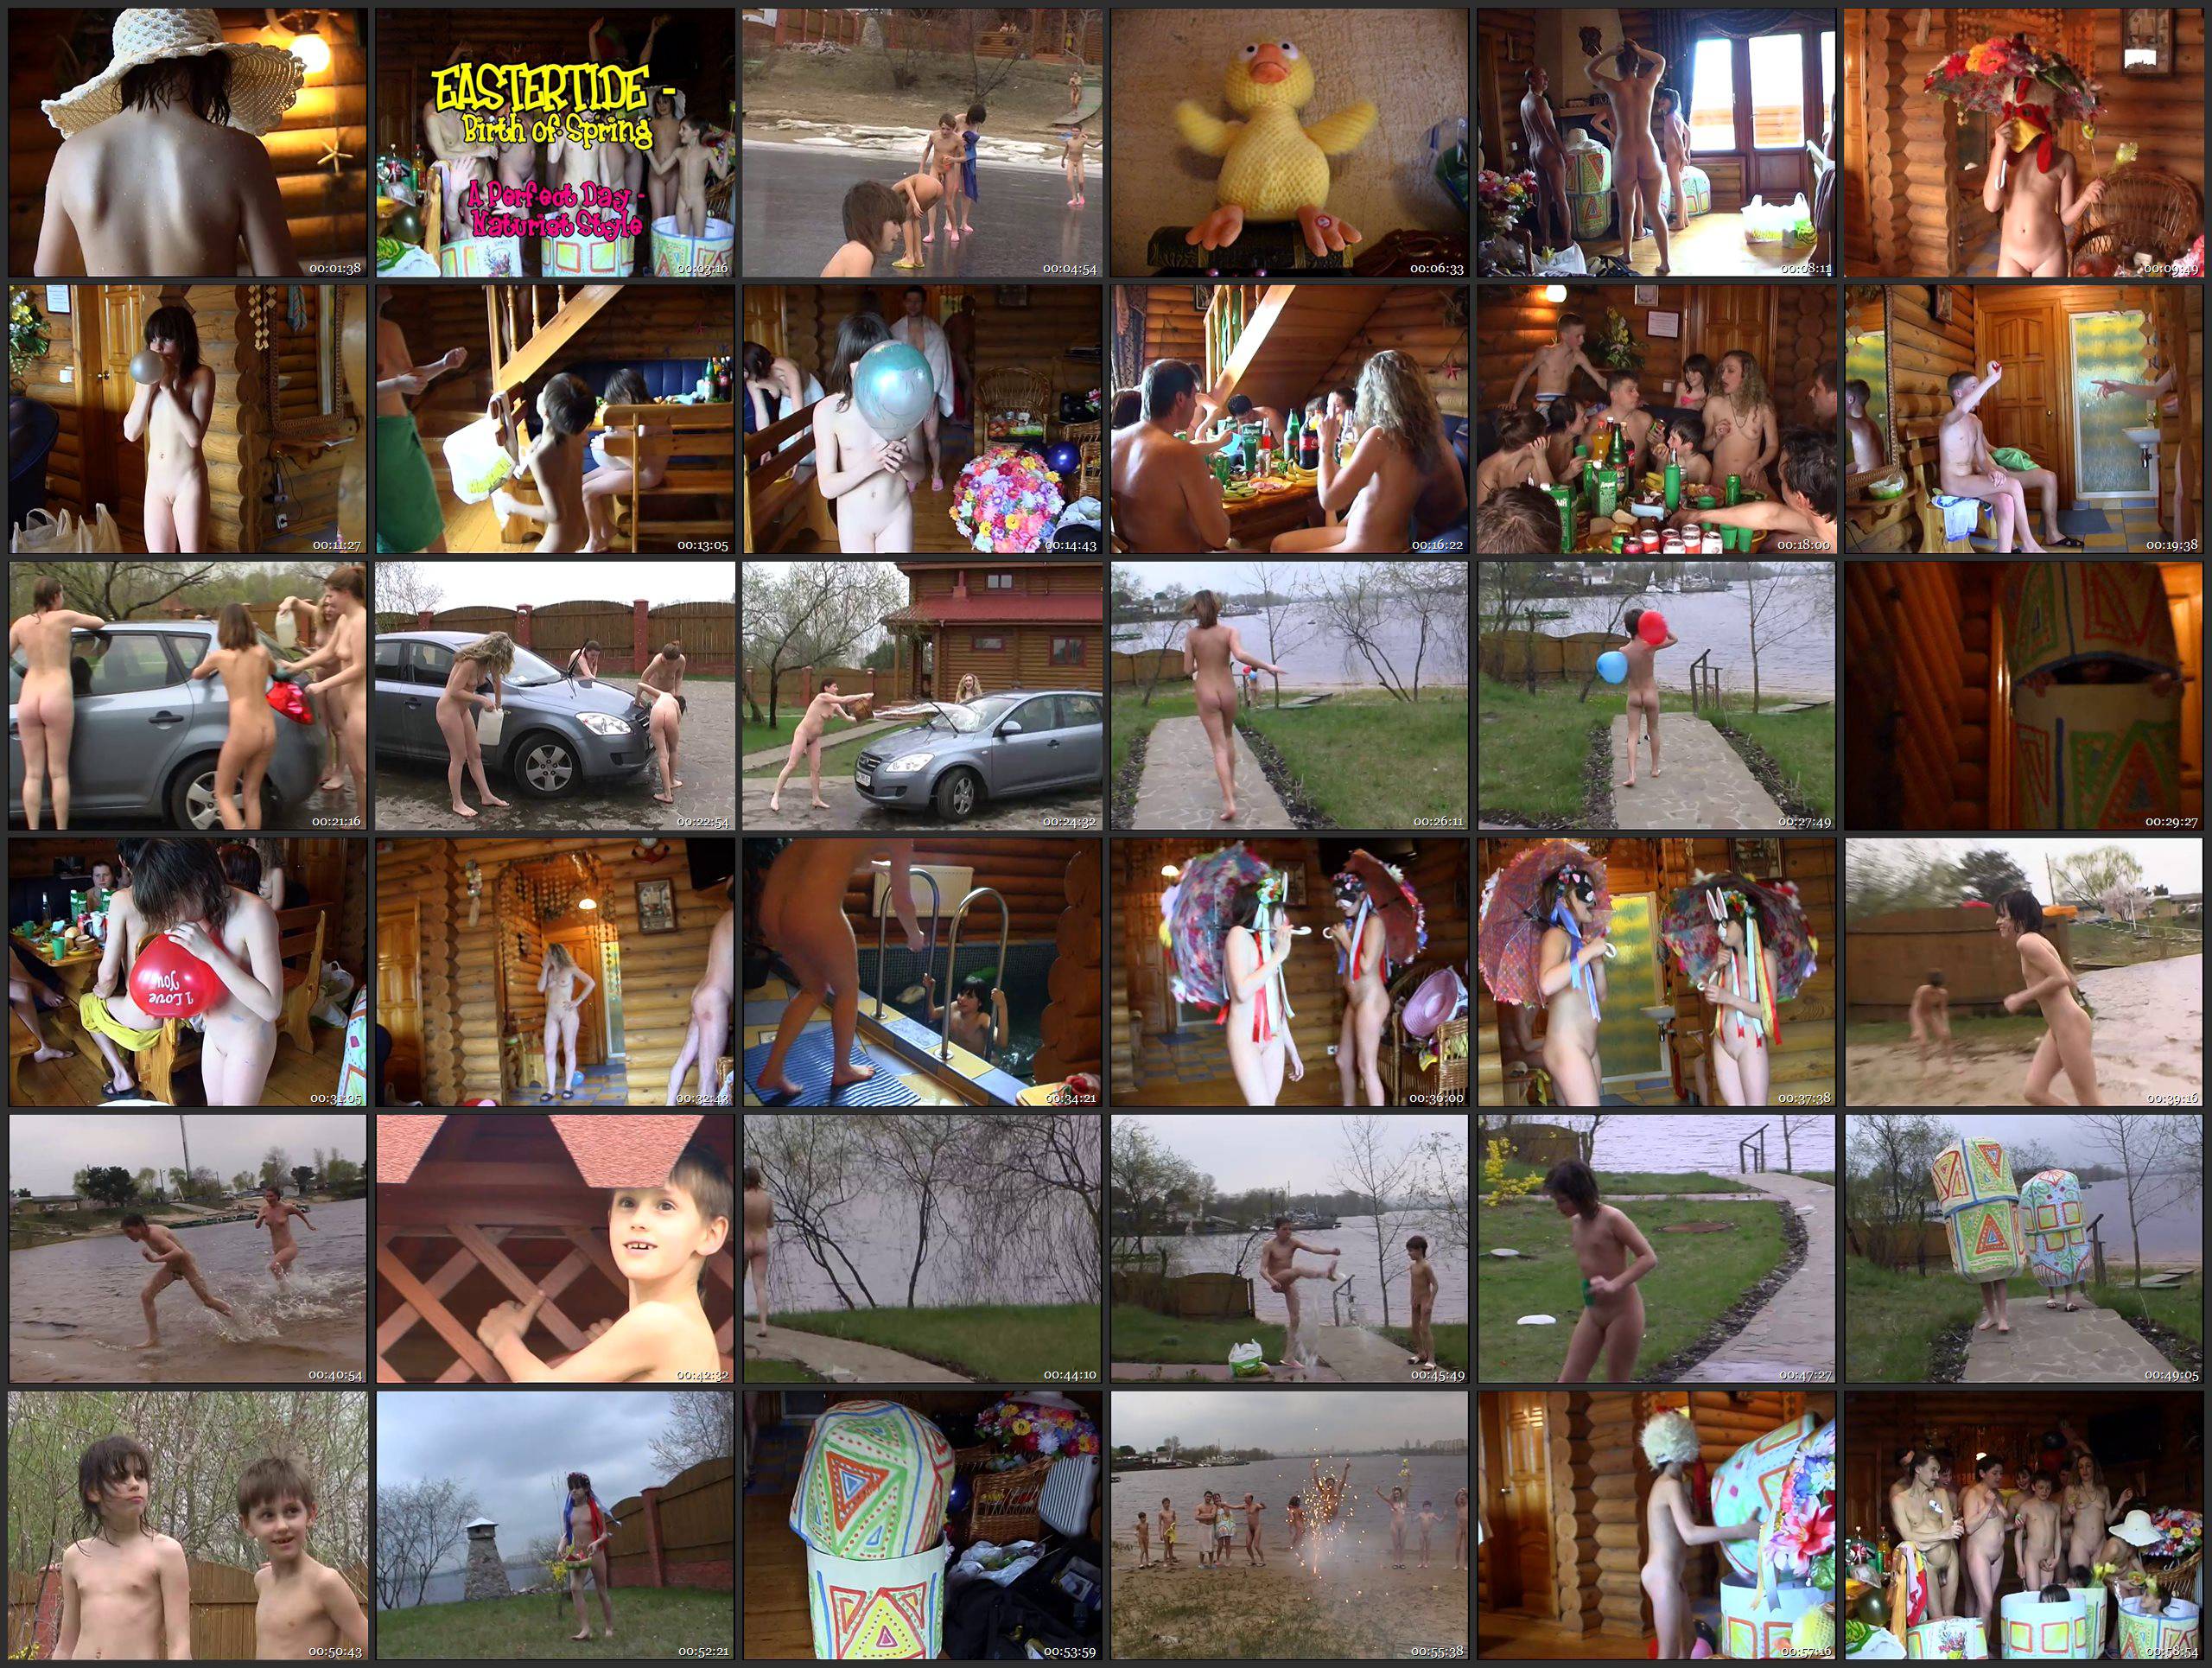 RussianBare and Enature Videos Eastertide - Birth of Spring. A Perfect Day - Naturist Style - Thumbnails